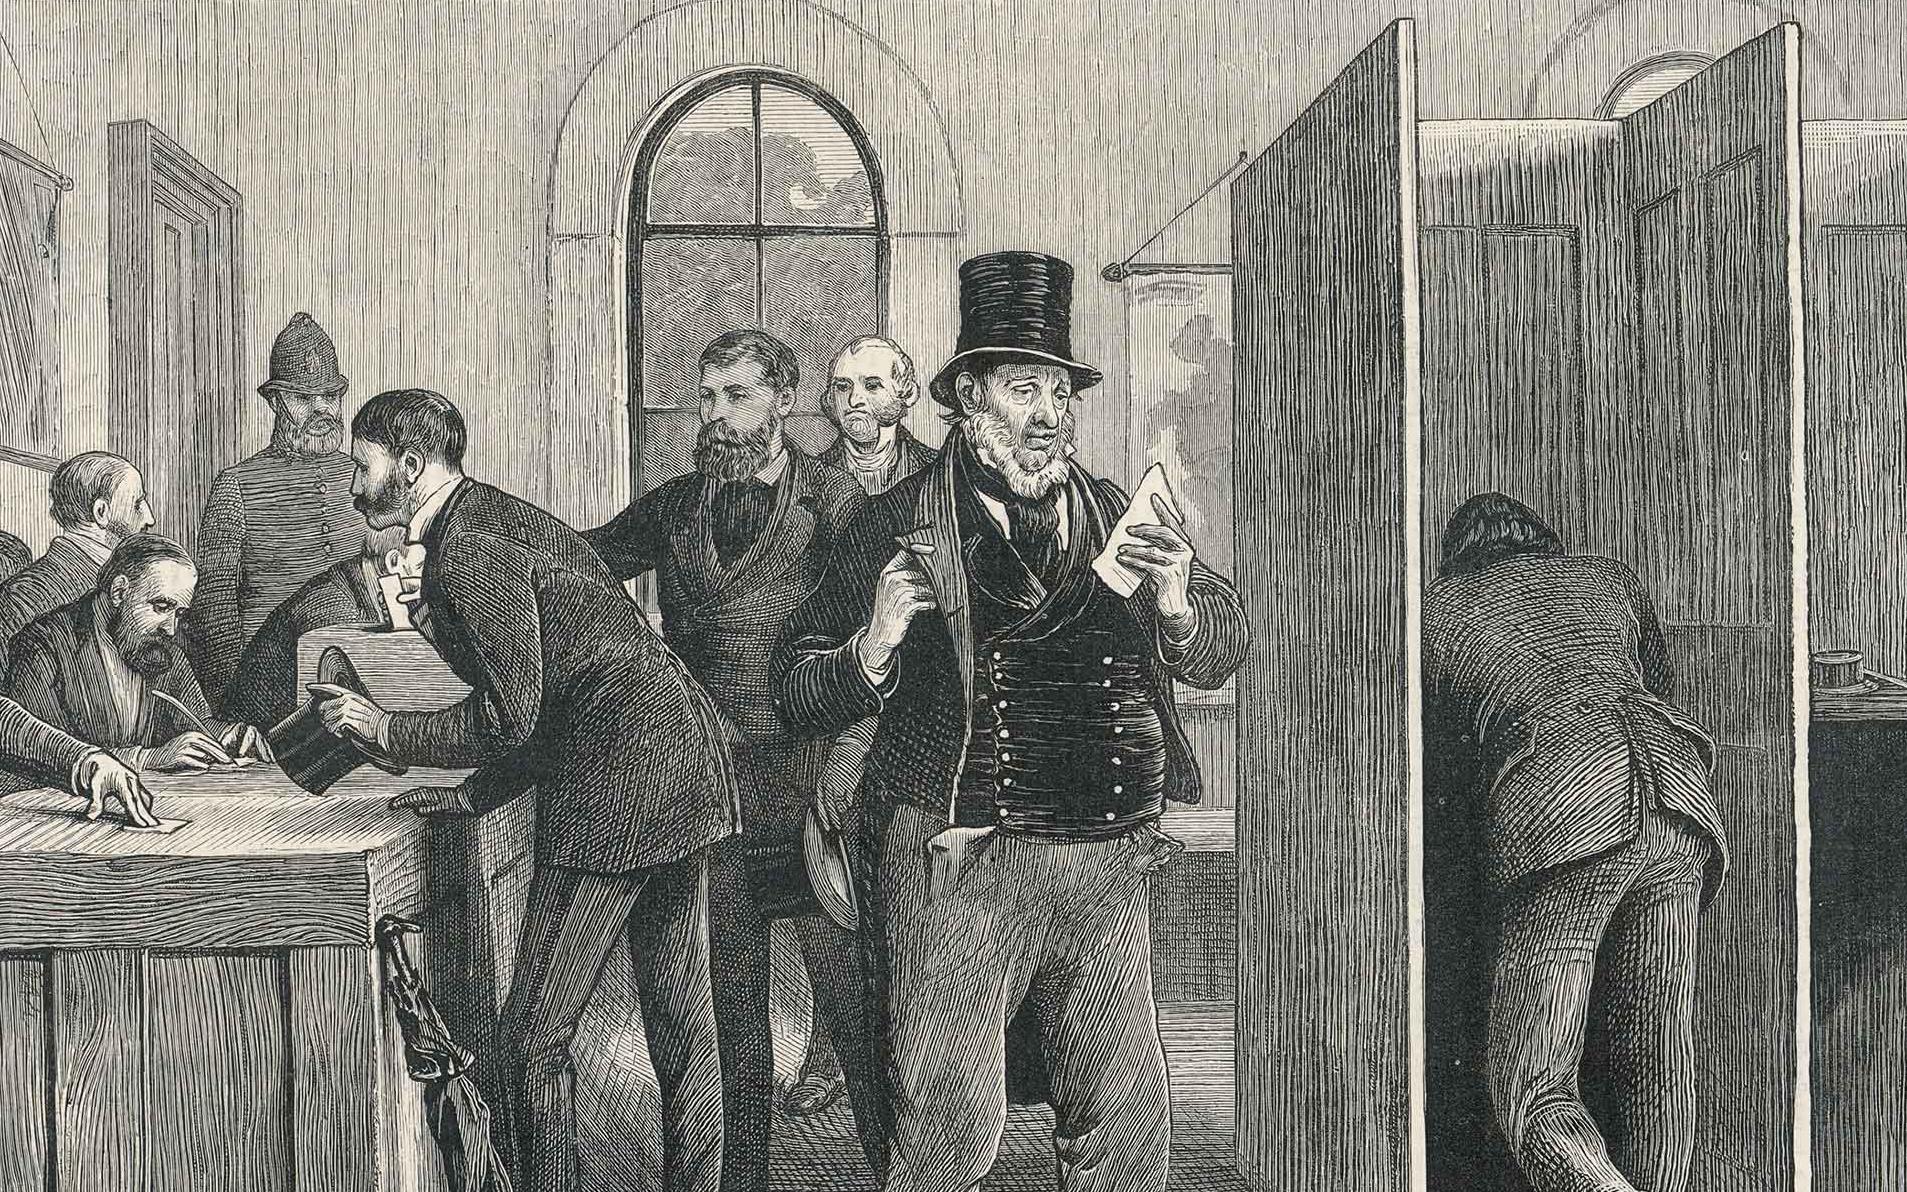 Black and white illustration of men at a polling booth.